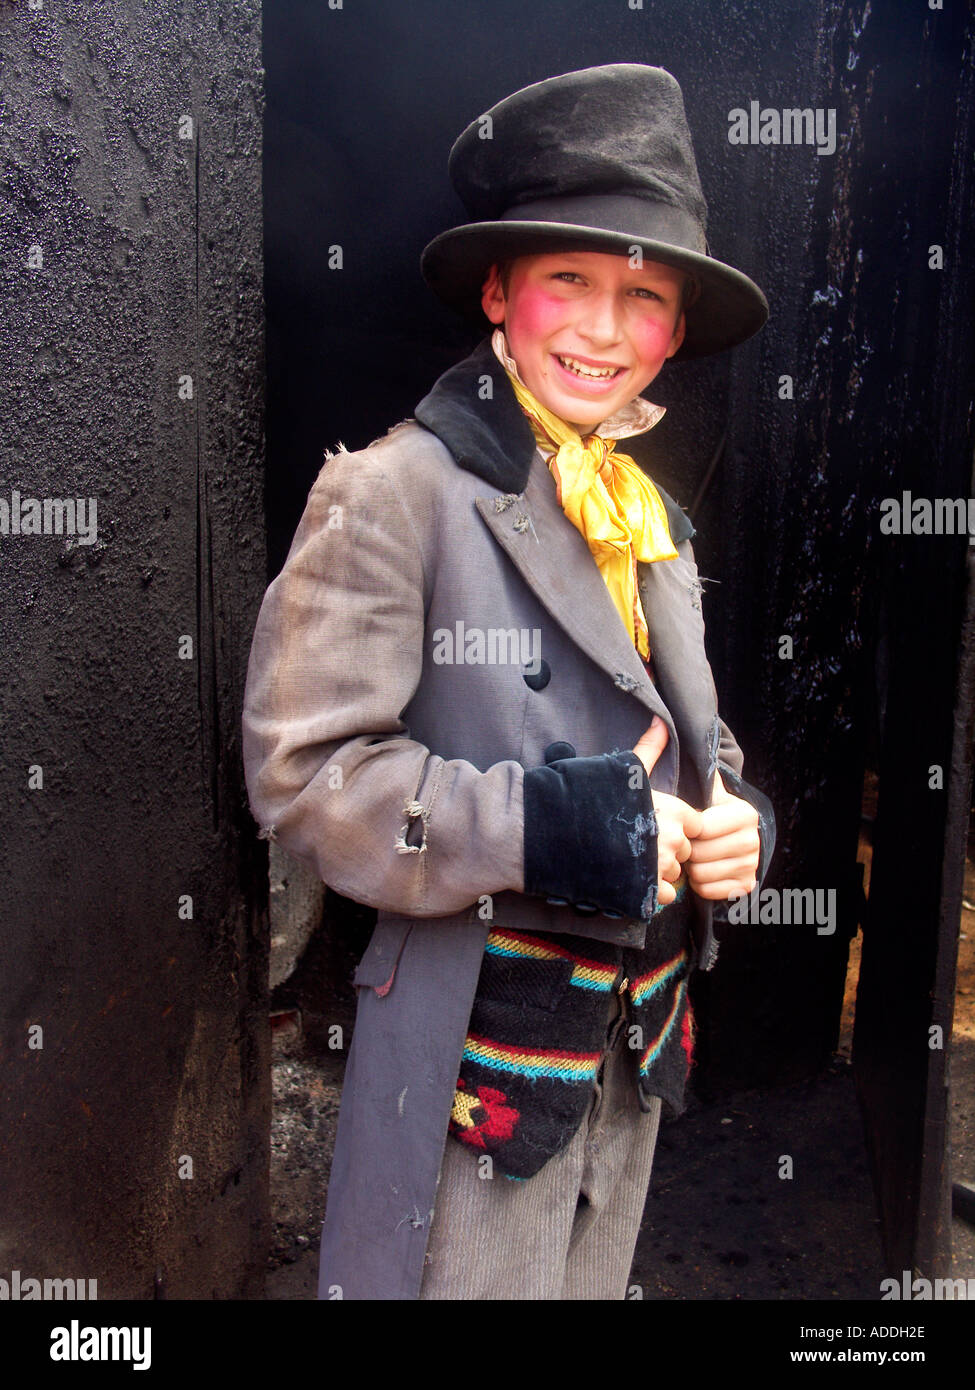 Young boy as the Artful Dodger in Oliver Twist school play Stock Photo